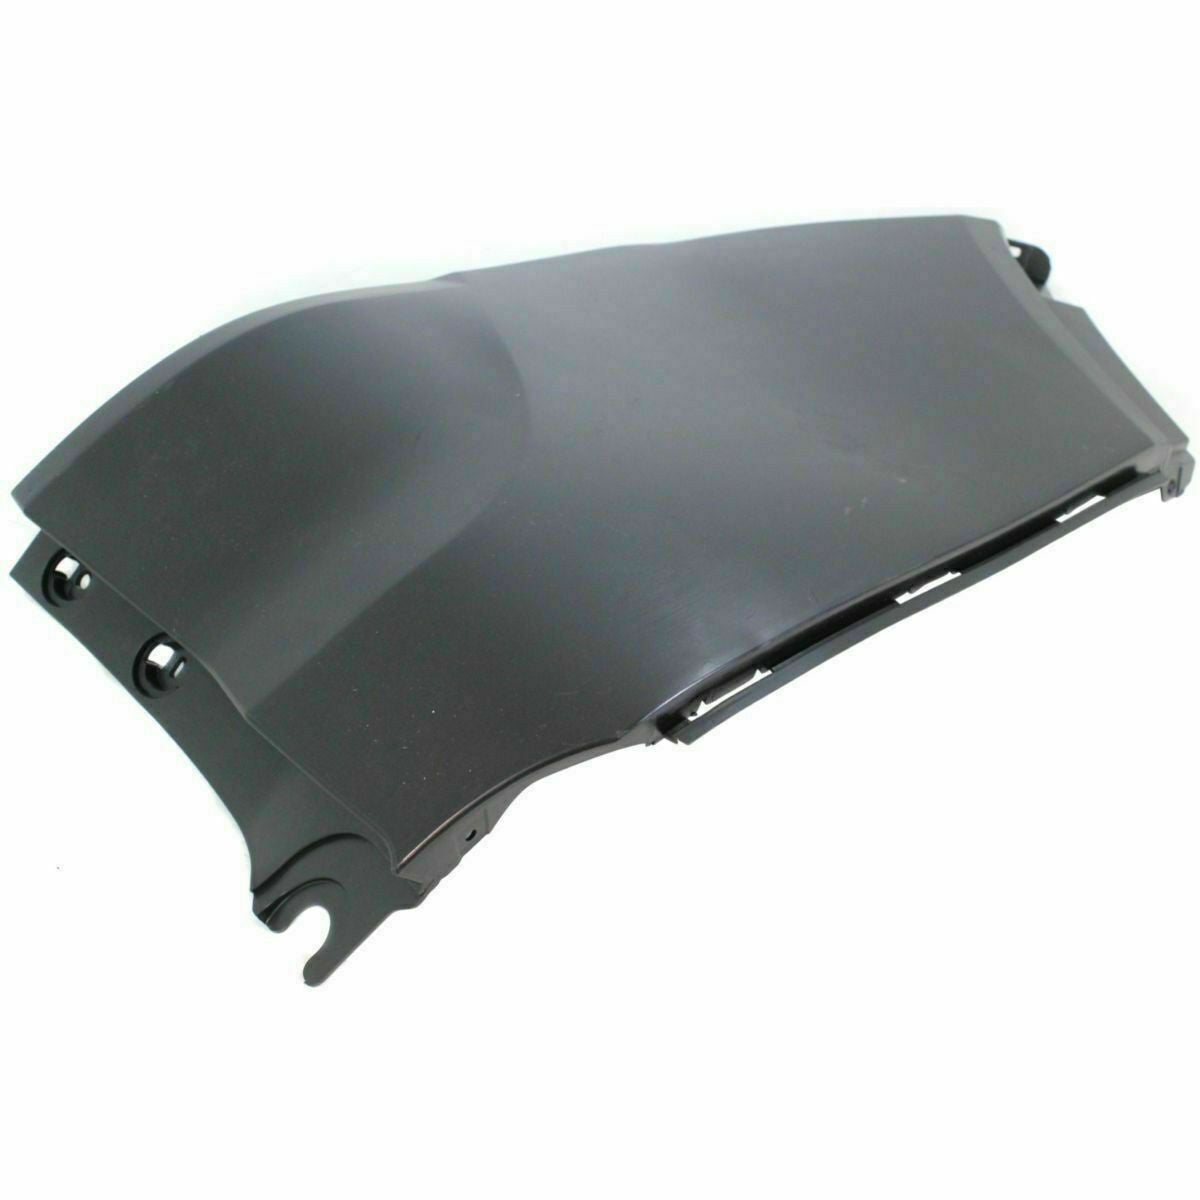 2007-2012 GMC ACADIA; RT Rear Bumper Cover; Side Cover Painted to Match